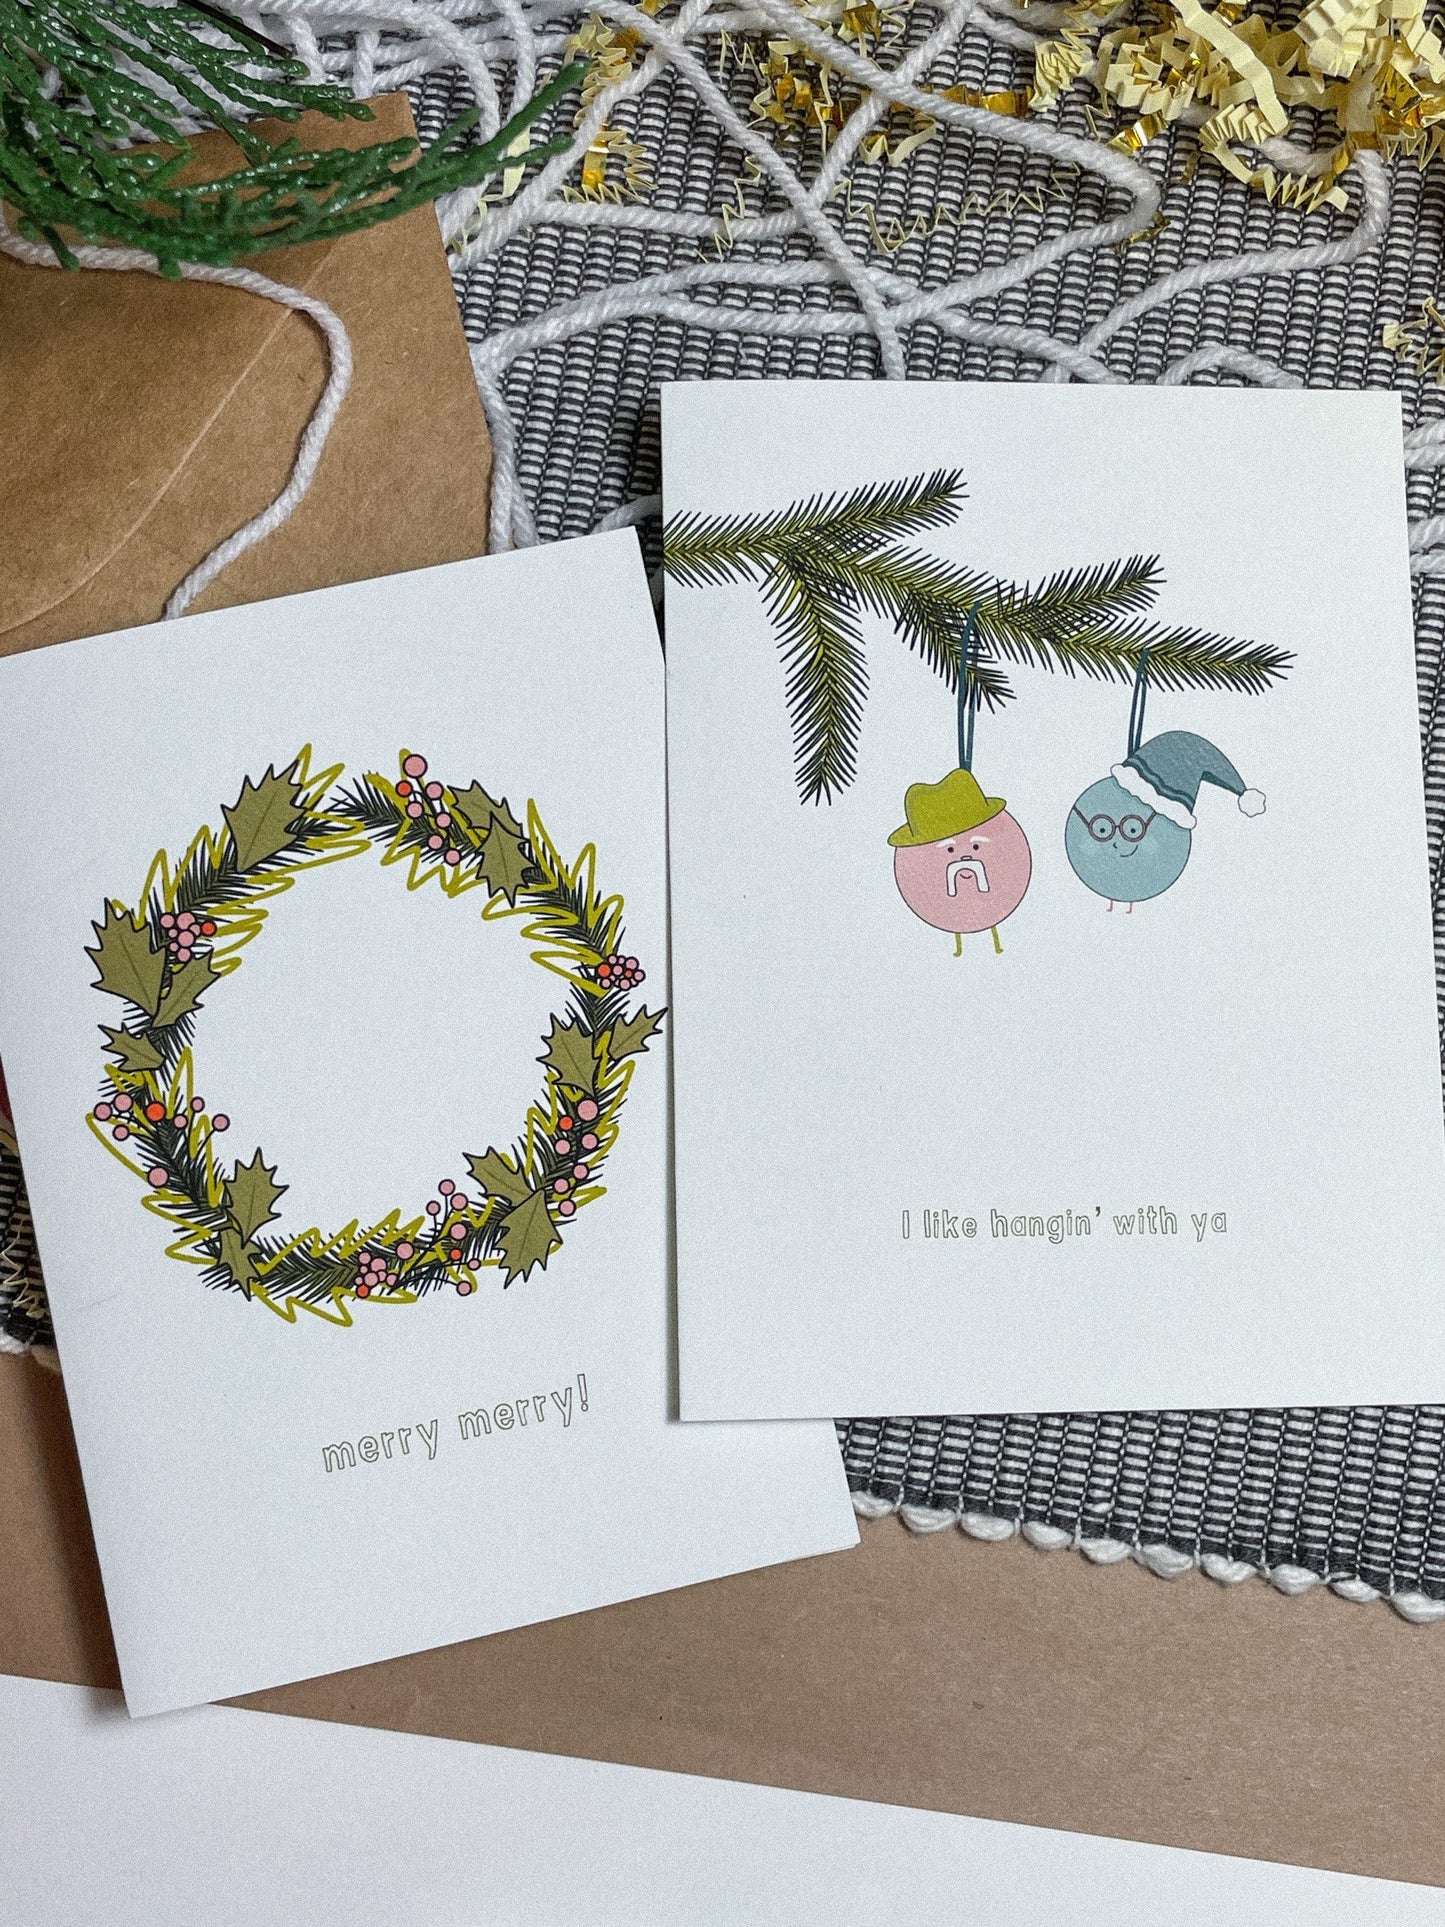 This card features a very merry Christmas wreath with the text 'merry merry!" It's the perfect Christmas card for anyone in your life! Shown alongside another card from the collection which shows 2 little ornament men hanging from a christmas tree branch